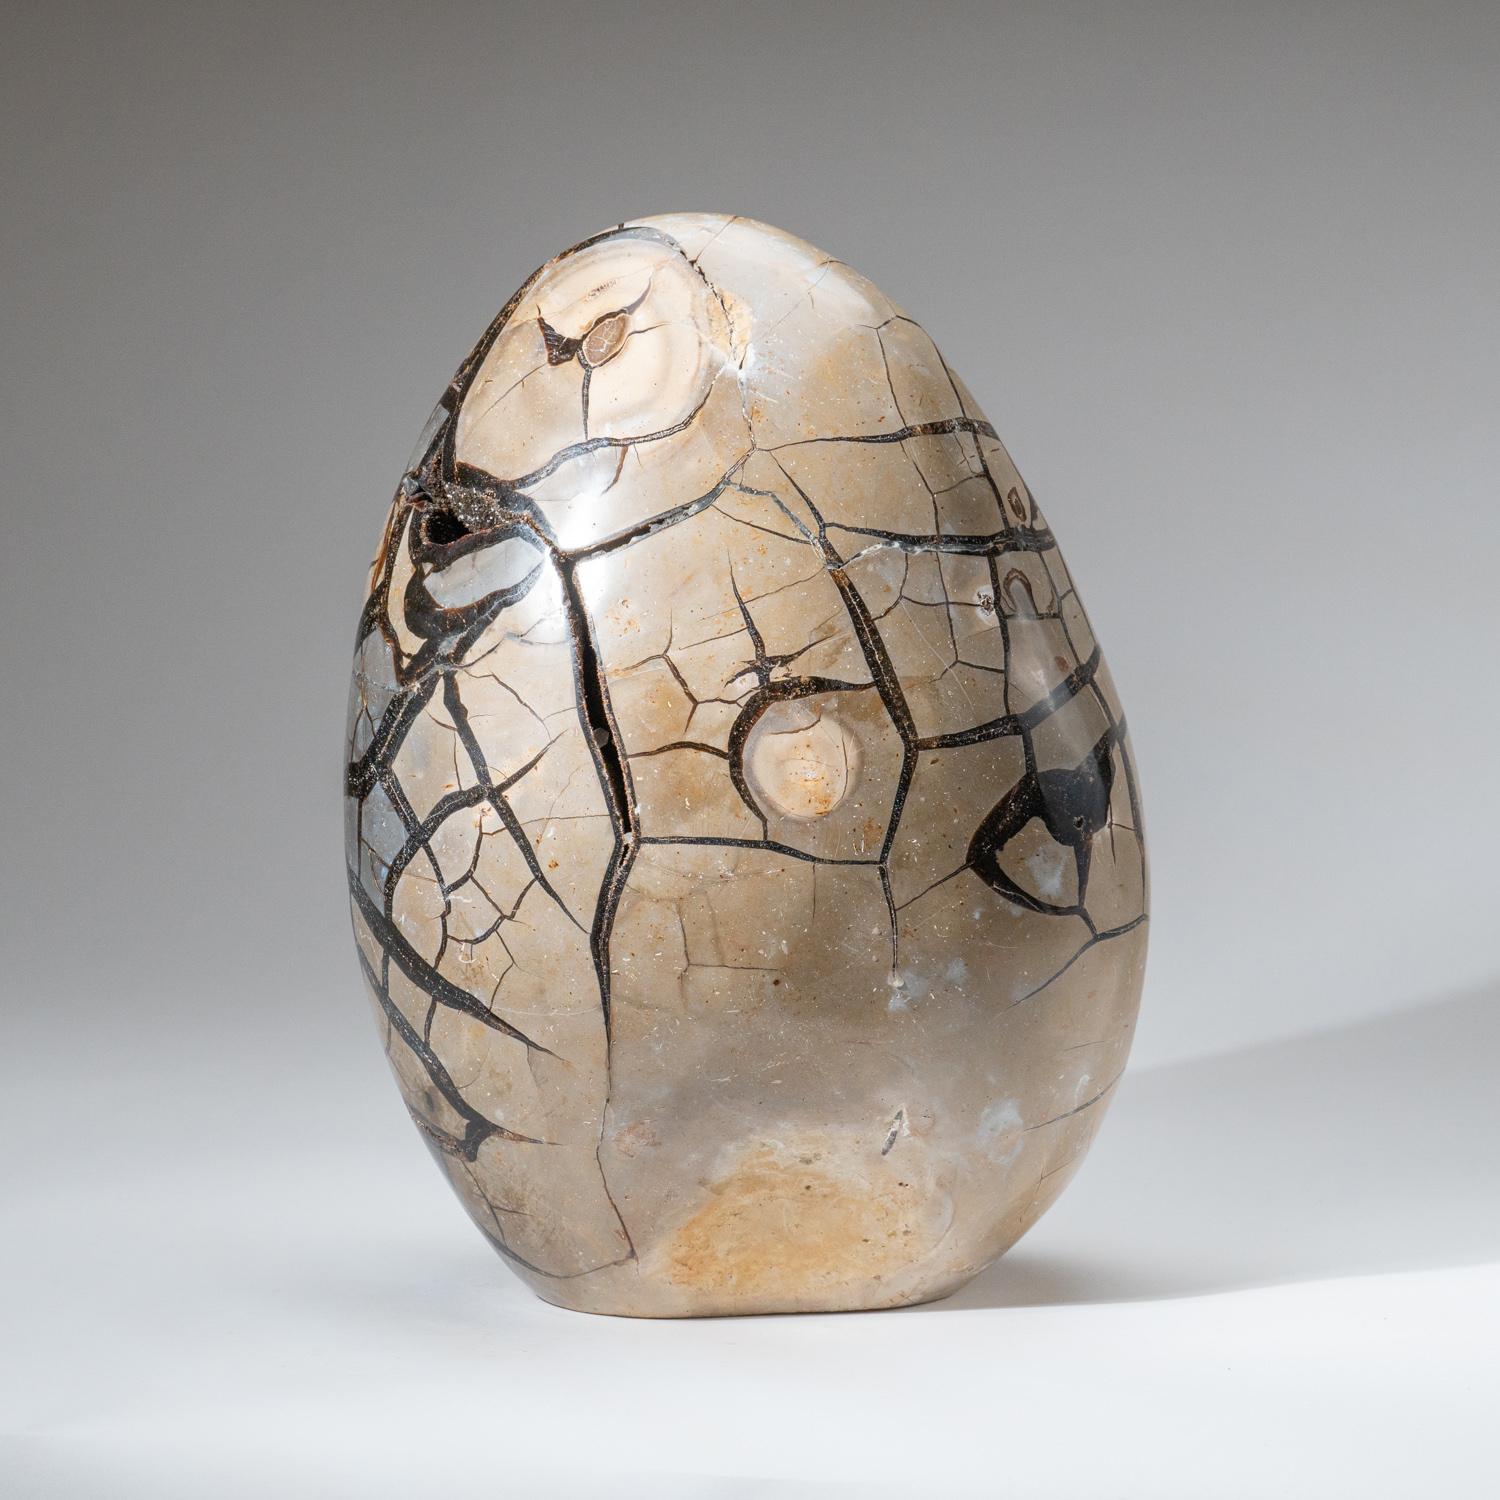 This 34 lb AAA quality Septarian Druzy Geode Egg from Madagascar features an exposed area lined with dazzling druzy quartz crystals, as well as a polished back side, providing a high reflective surface. Septarian is a combination of yellow calcite,